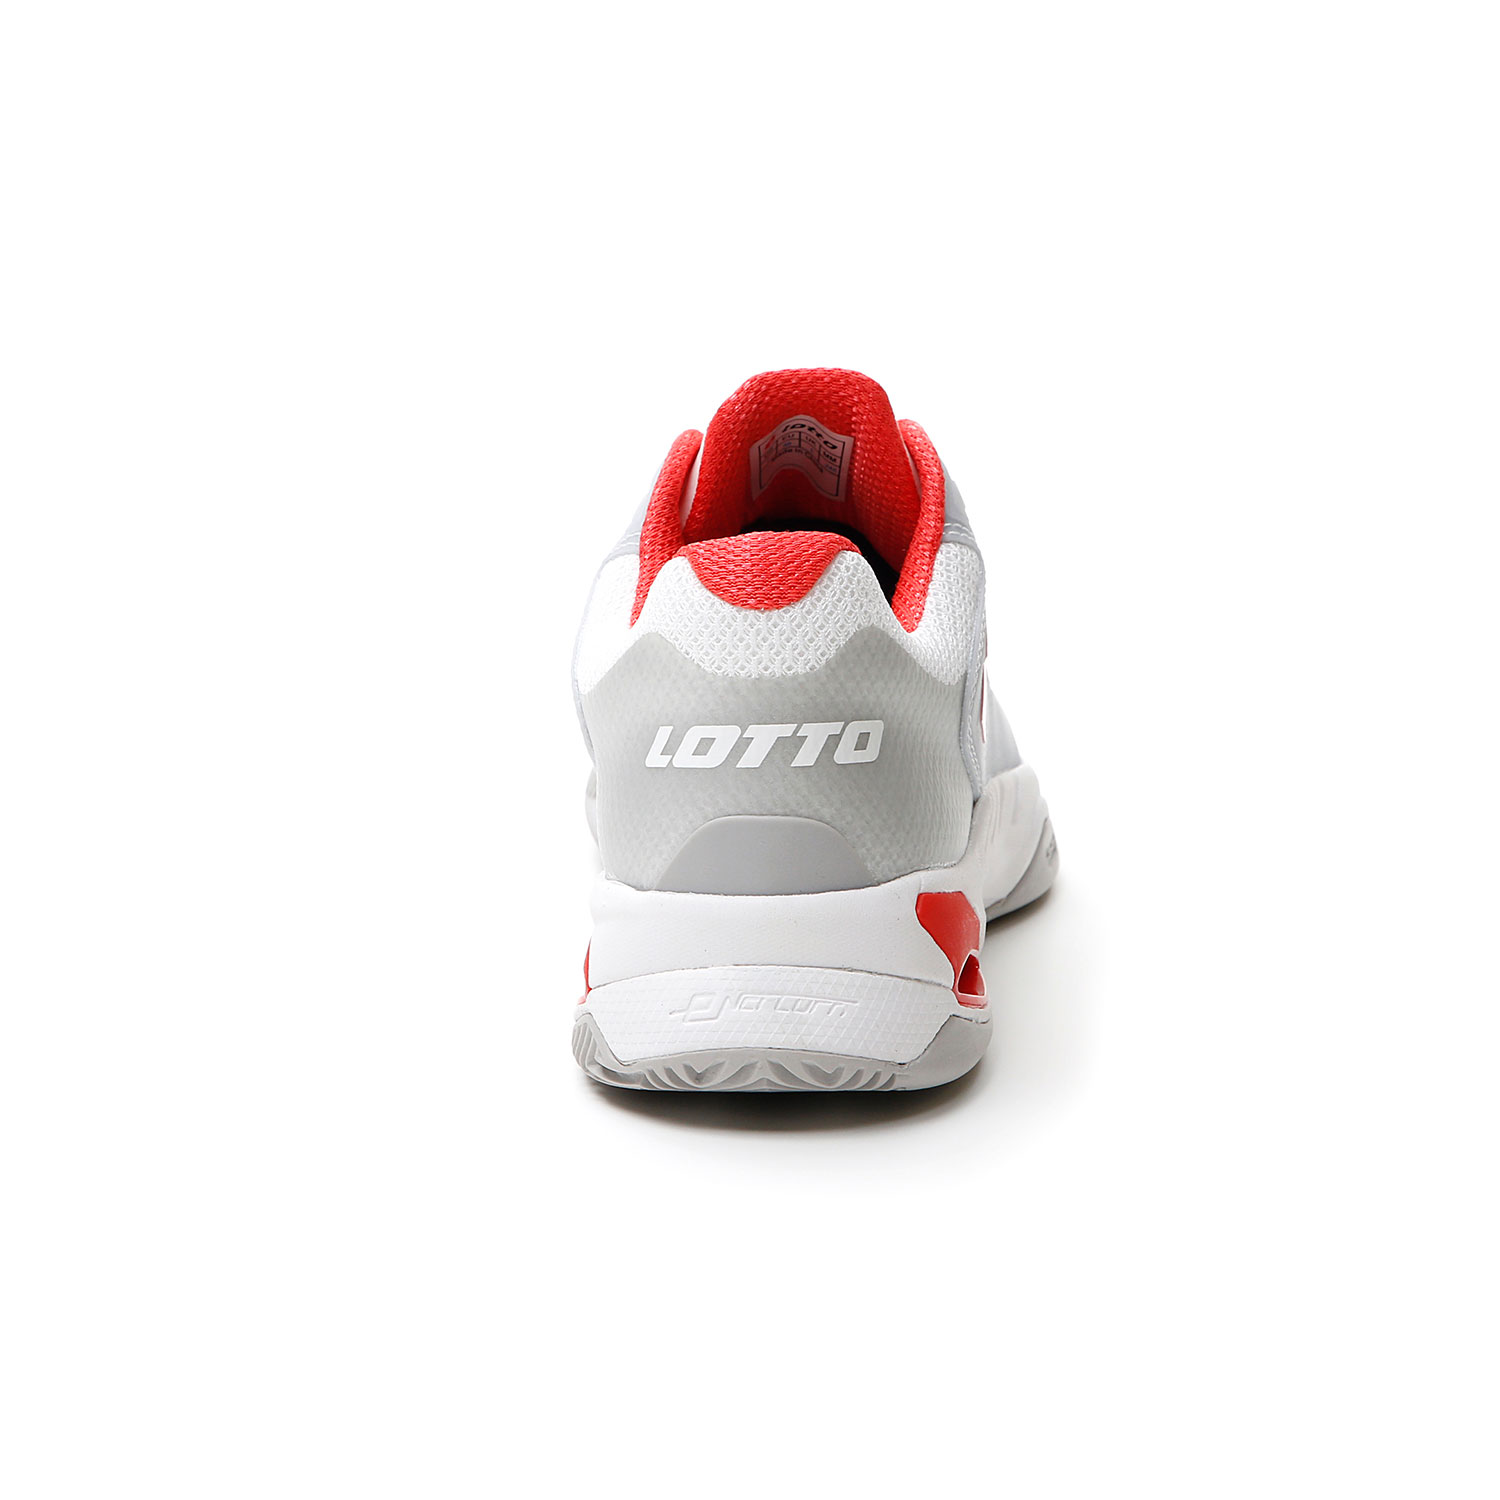 Lotto Mirage 100 Clay - All White/Red Poppy